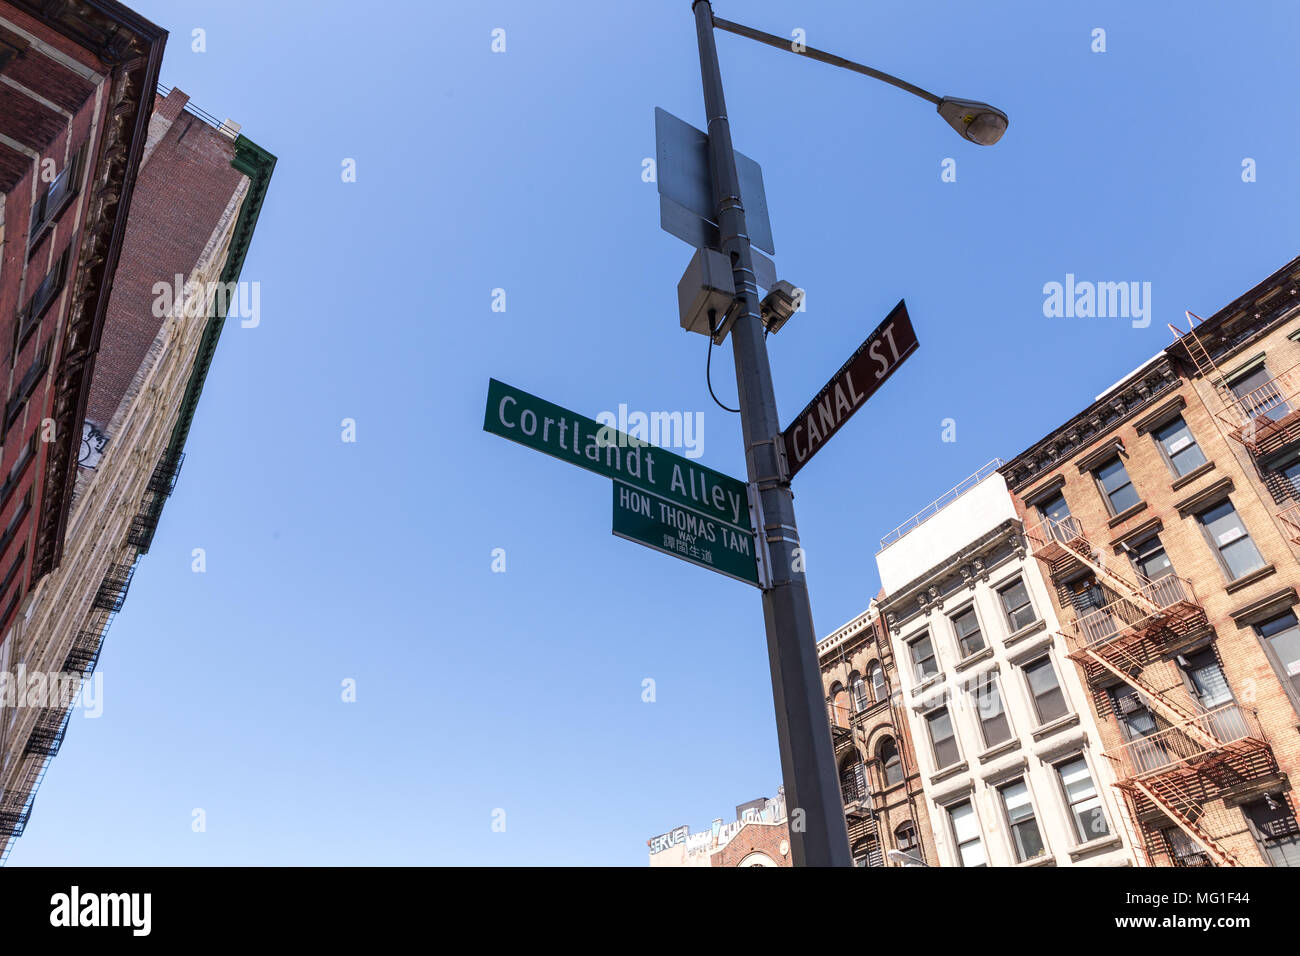 Cortlandt Alley and Canal St sign, Manhattan NYC Stock Photo